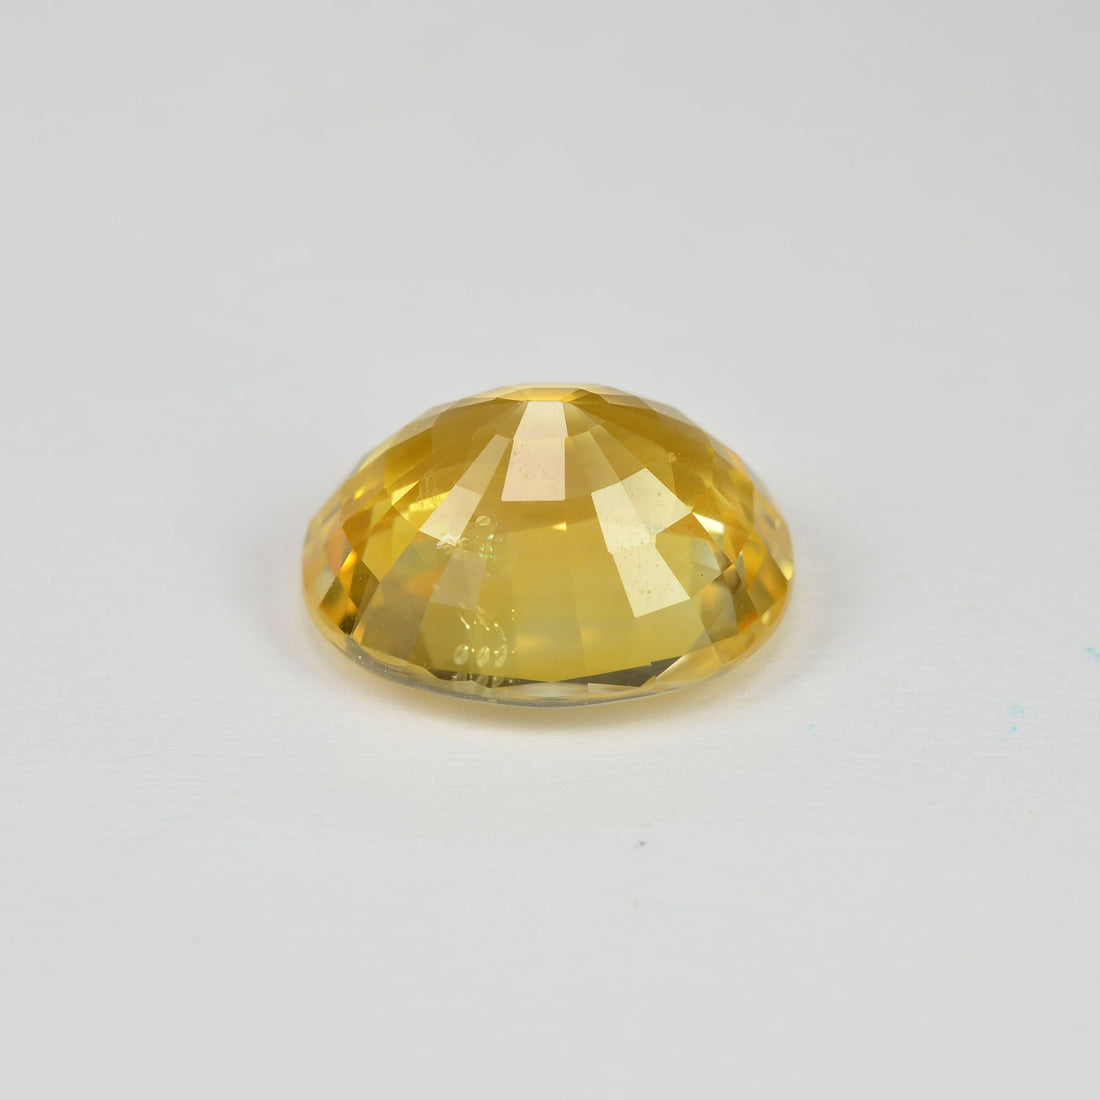 4.30 cts Natural Yellow Sapphire Loose Gemstone Oval Cut